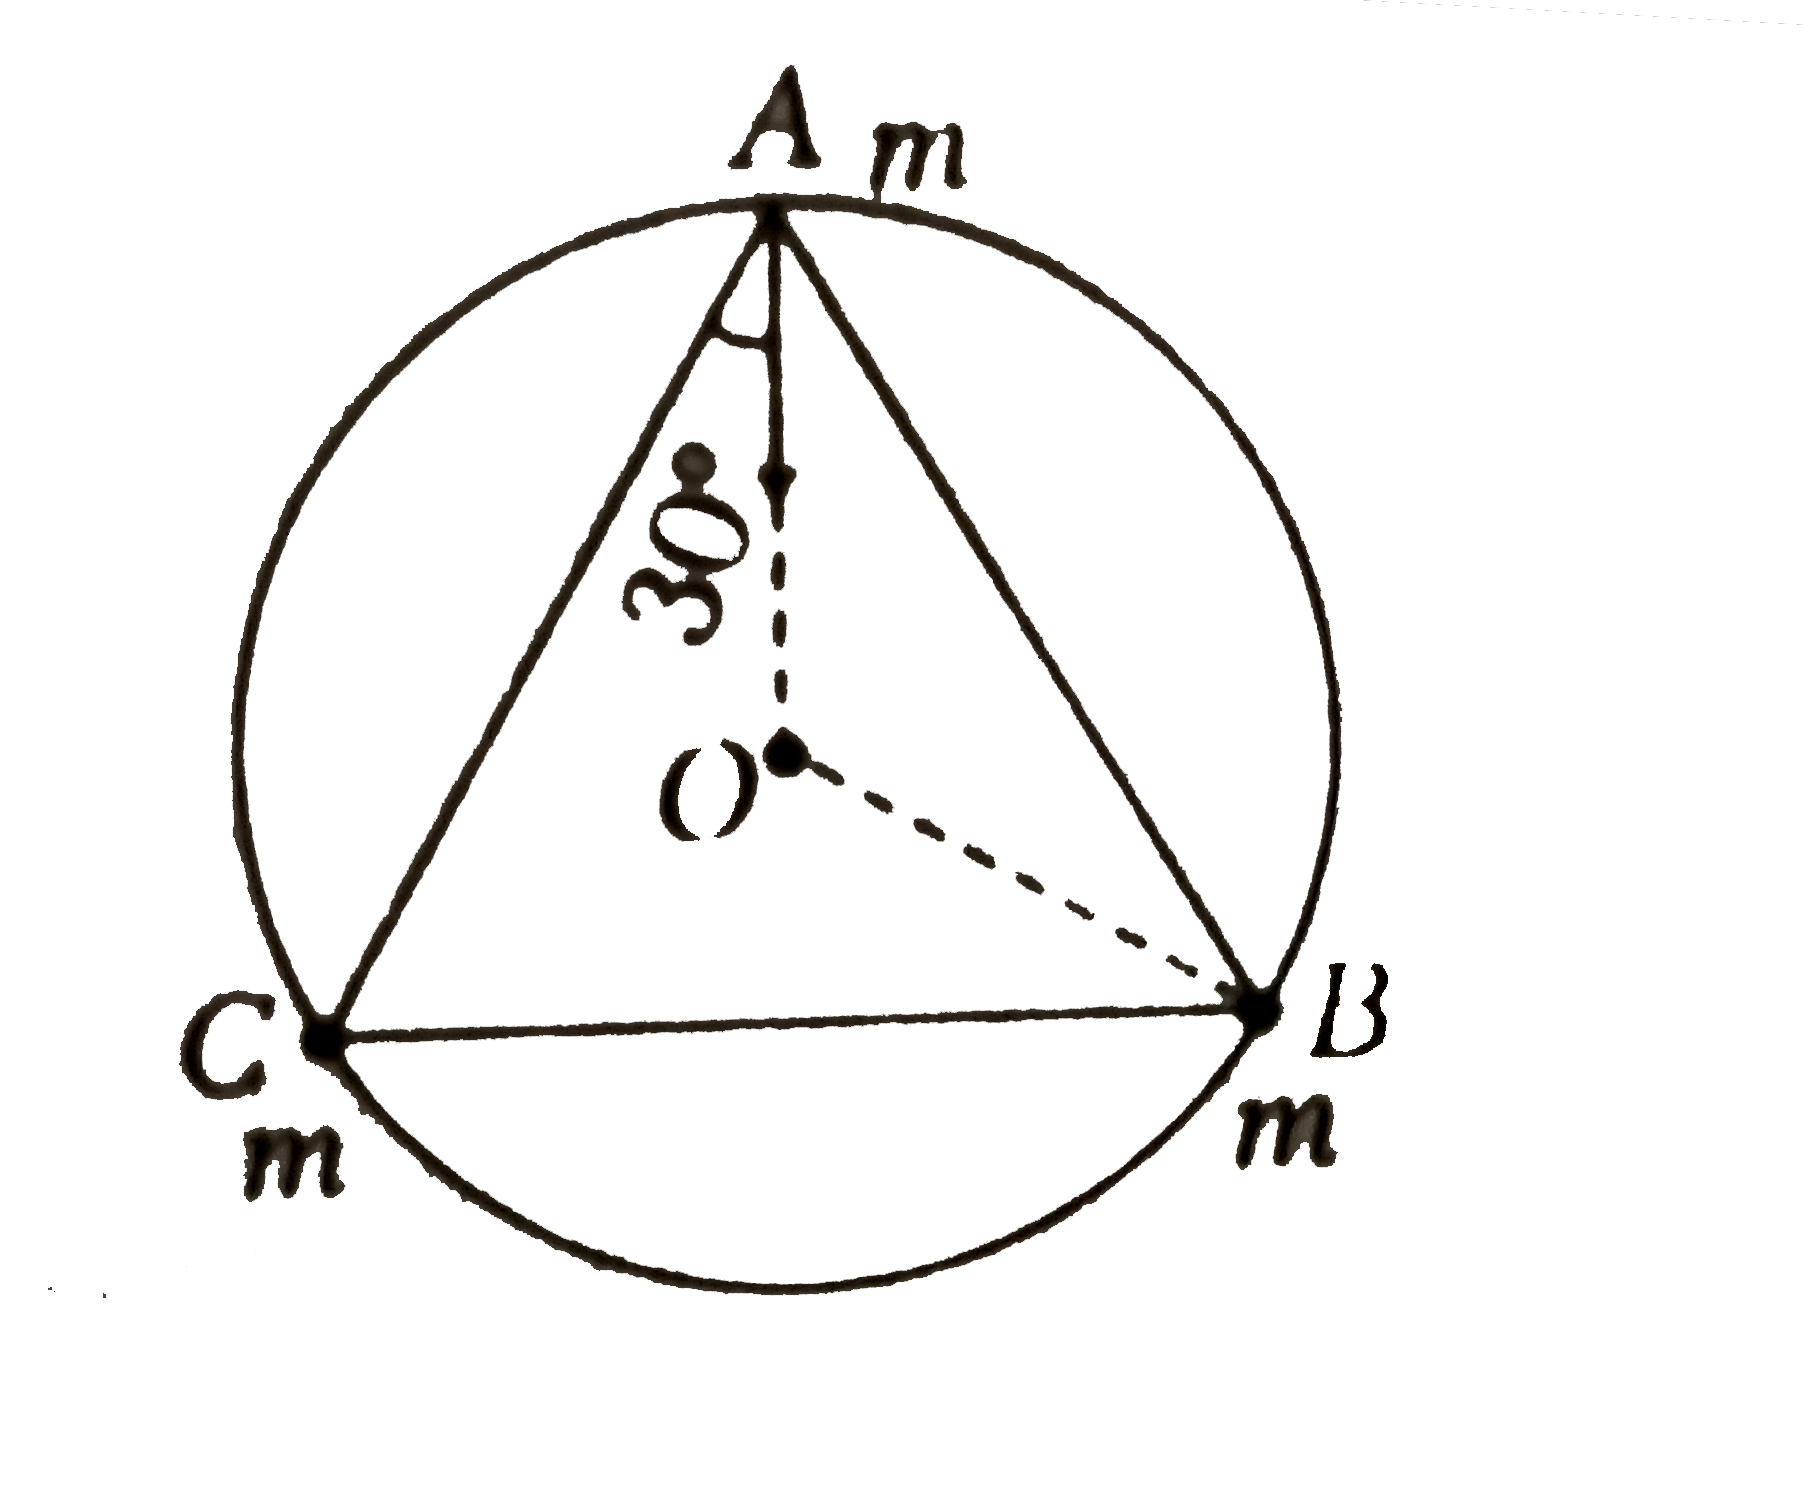 Three particle each of mass m, are located at the vertices of an equilateral triangle of side a. At what speed must they move if they all revolve under the influence of their gravitational force of attraction in a circular orbit circumscribing the triangle while still preserving the equilateral triangle ?